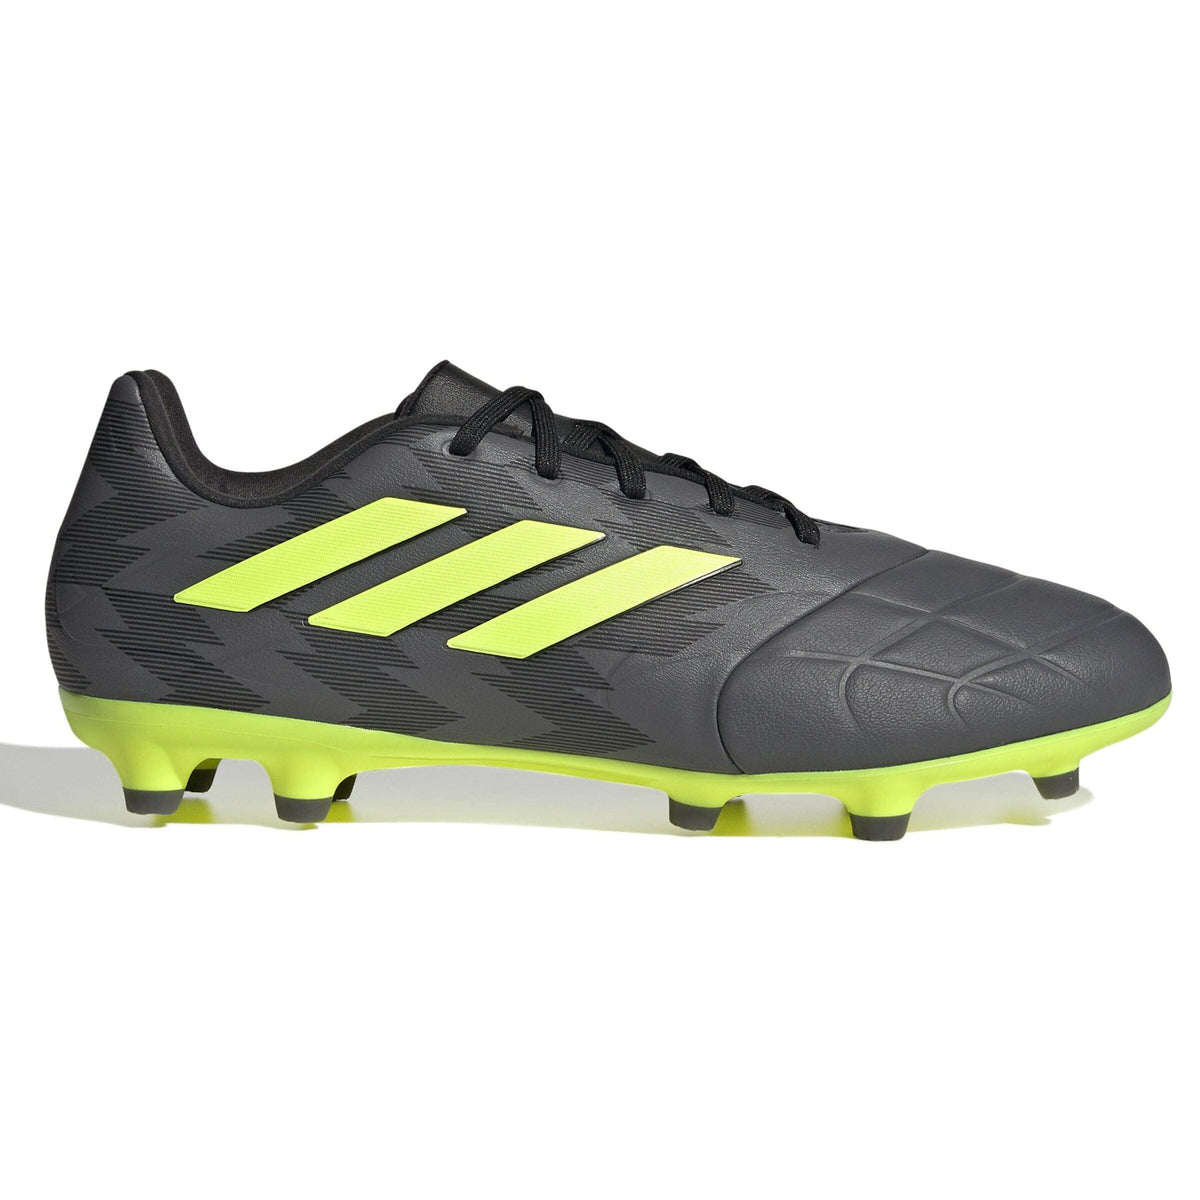 adidas Unisex Copa Pure Inj.3 Firm Ground Cleats | IG0774 Soccer Cleats Adidas 6 Core Black / Team Solar Yellow 2 / Grey Five 